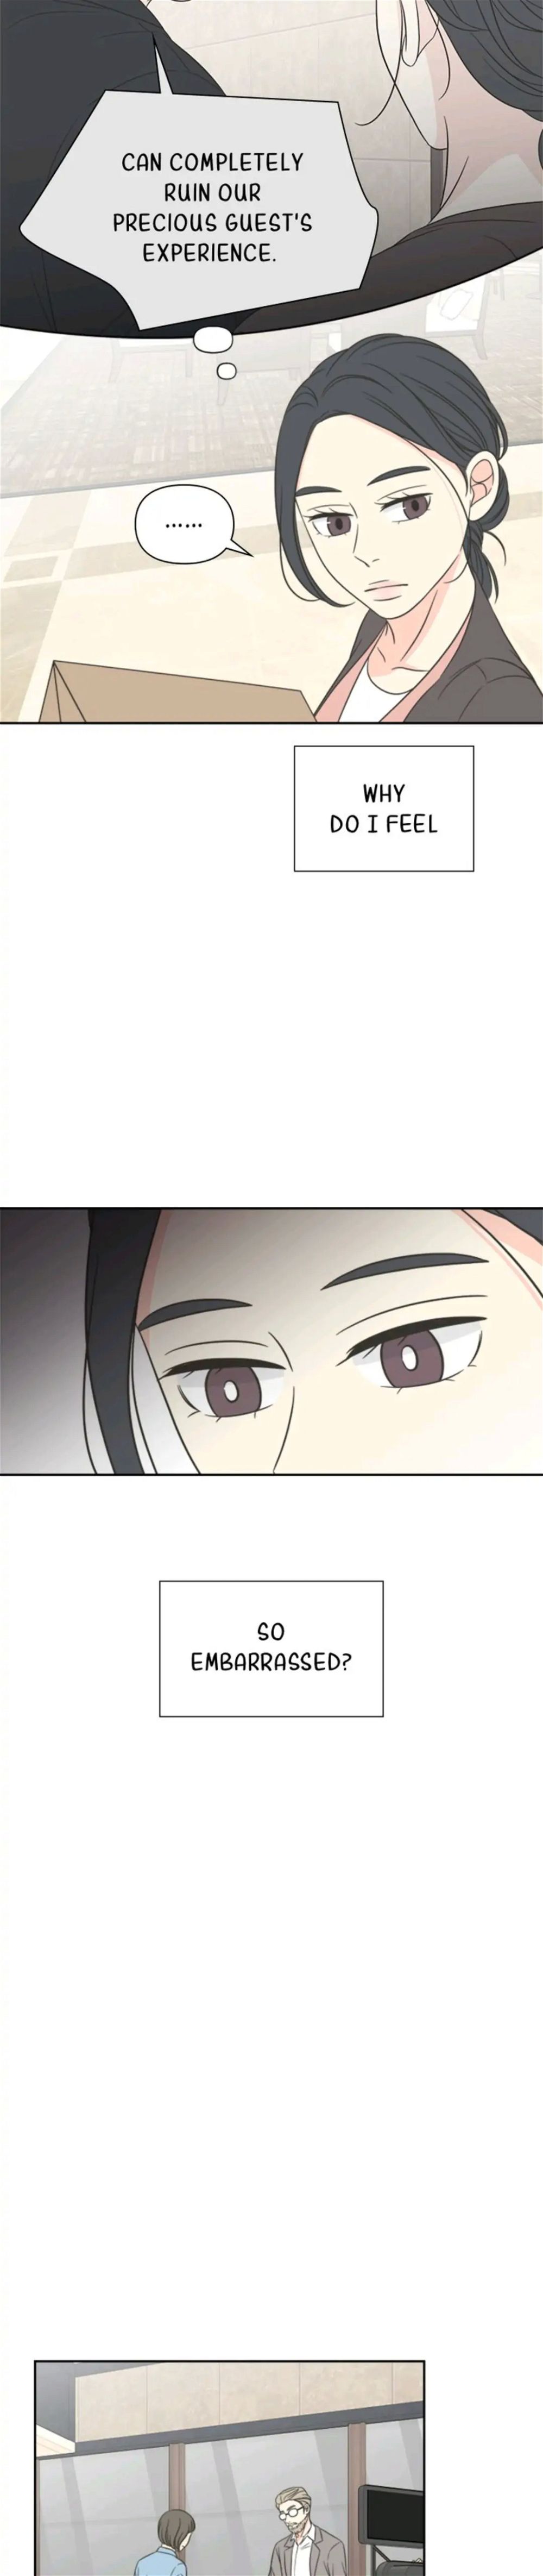 Check In to My Heart chapter 8 - Page 31